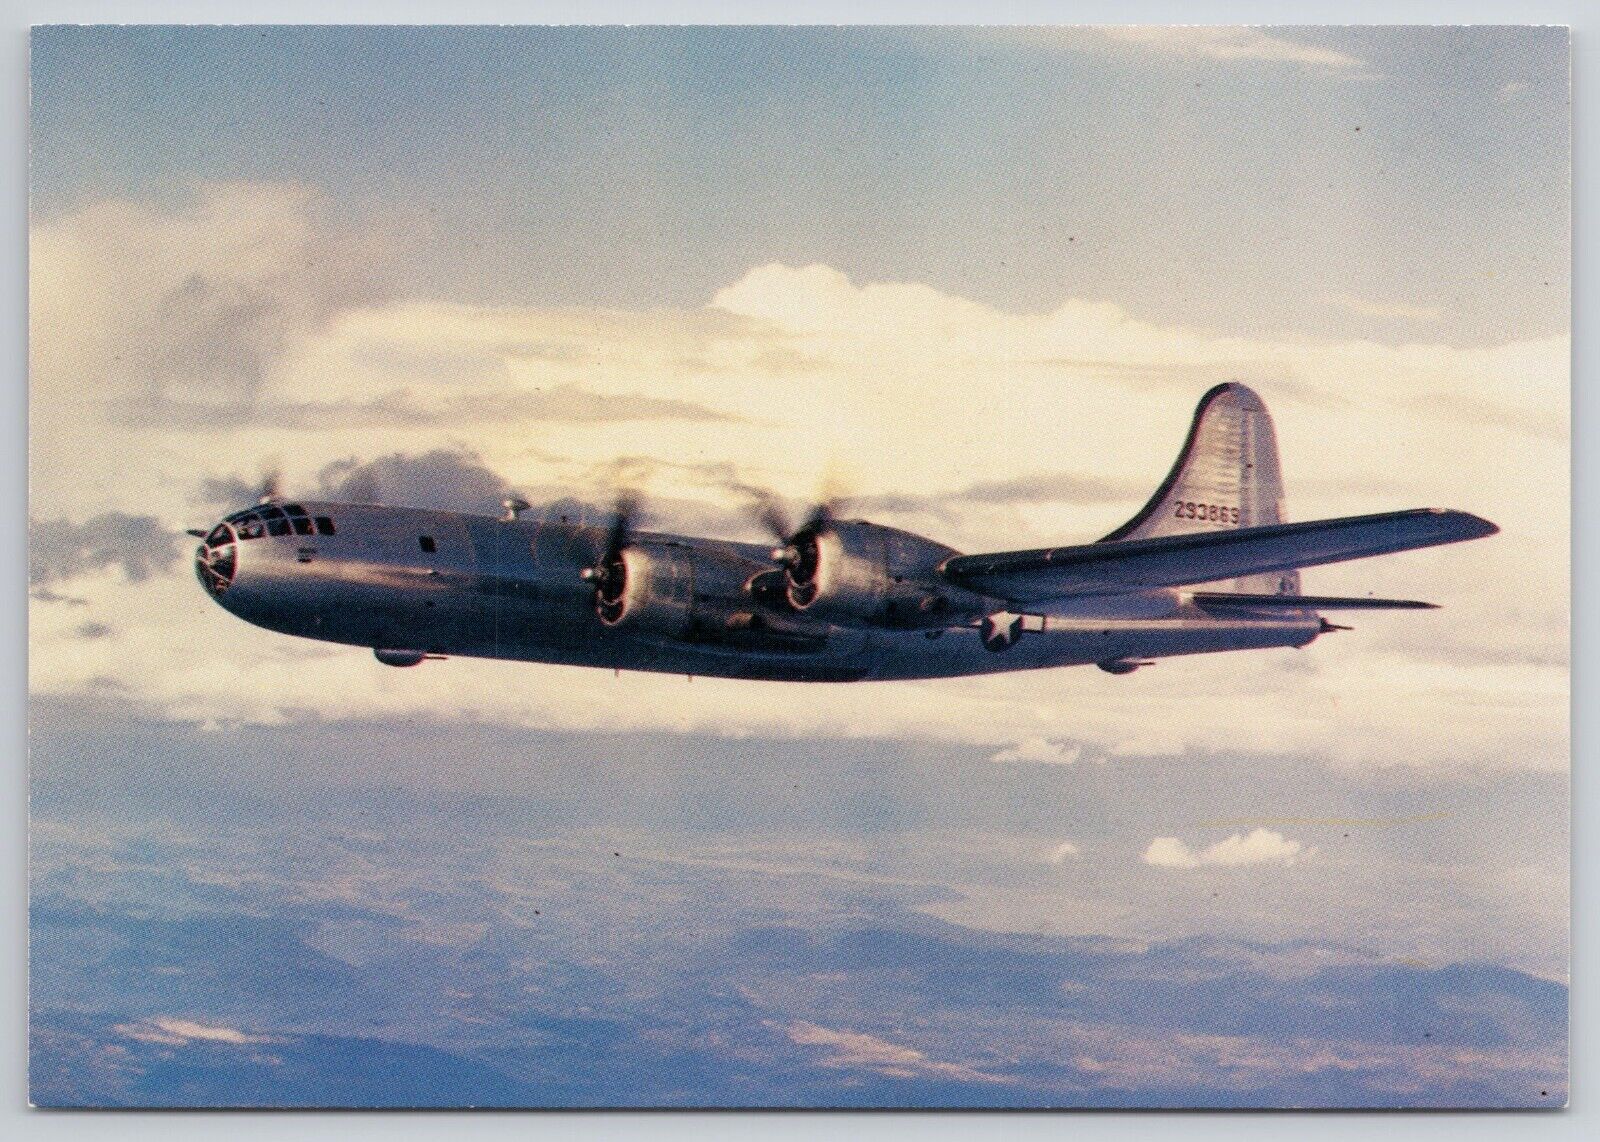 Boeing B-29A Superfortress 4 1/4 x 6 Unposted Postcard (HTC)